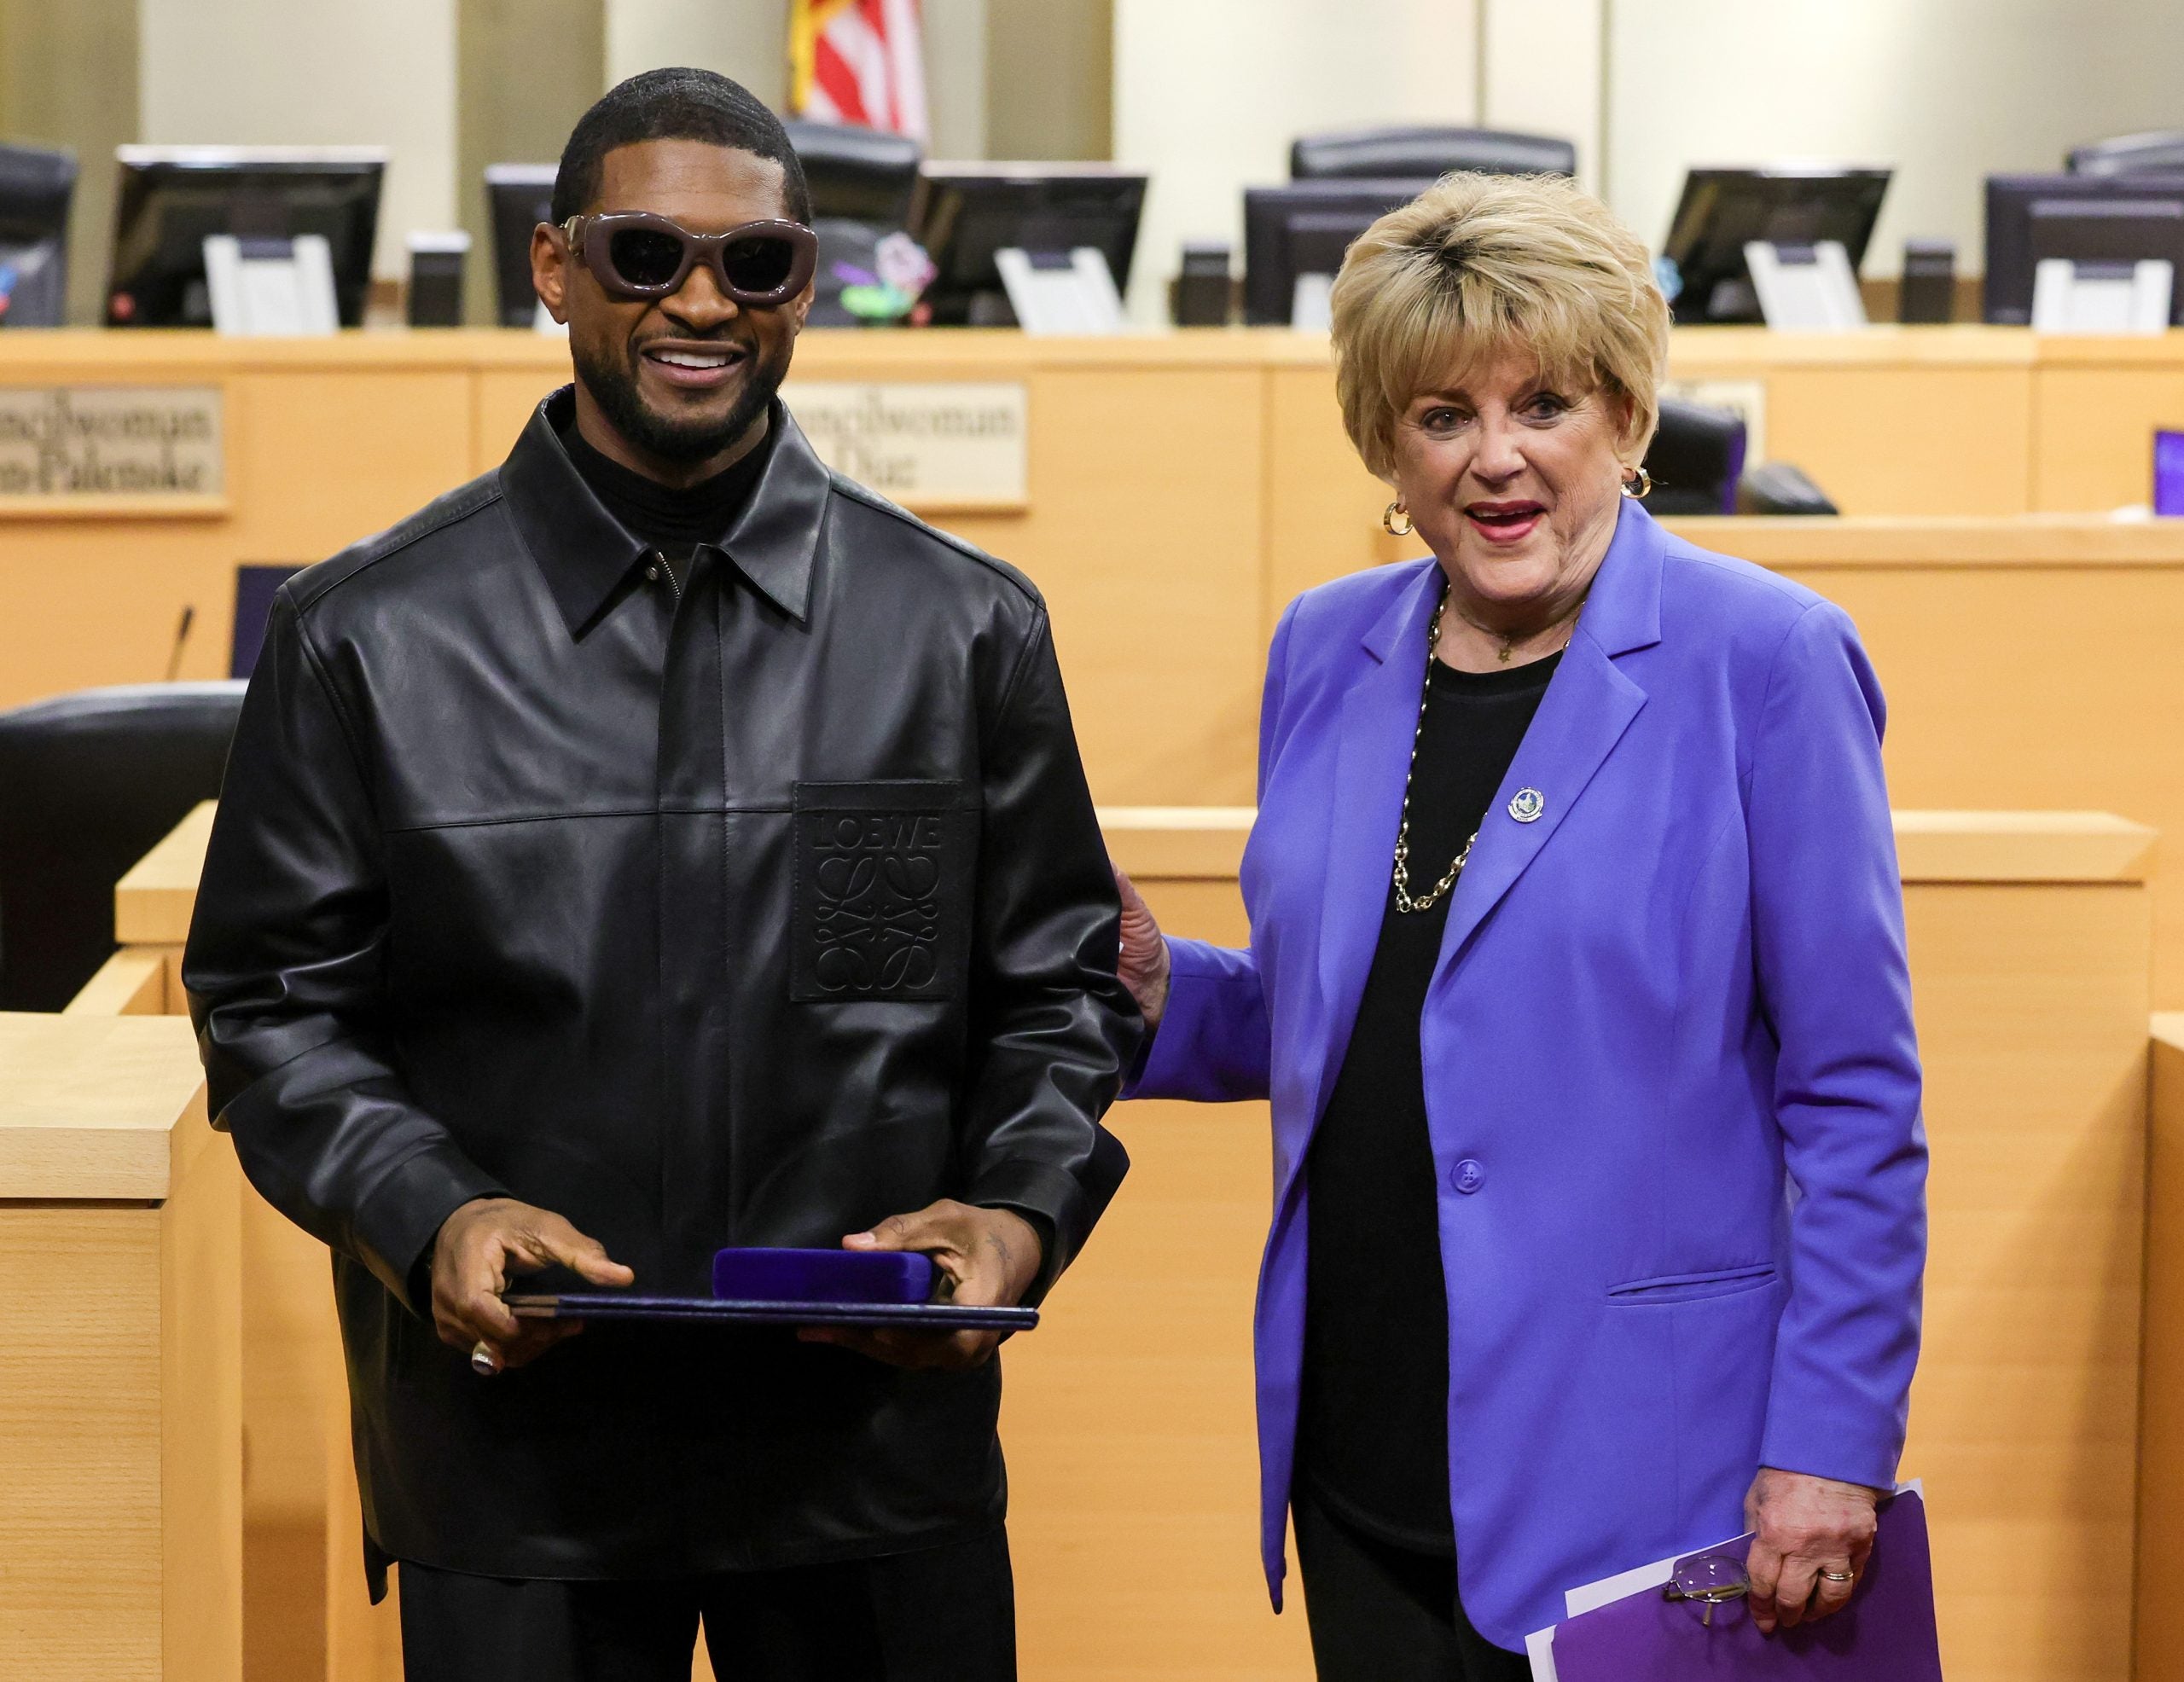 Usher Gears Up For Super Bowl Celebration With Diabetes Pledge